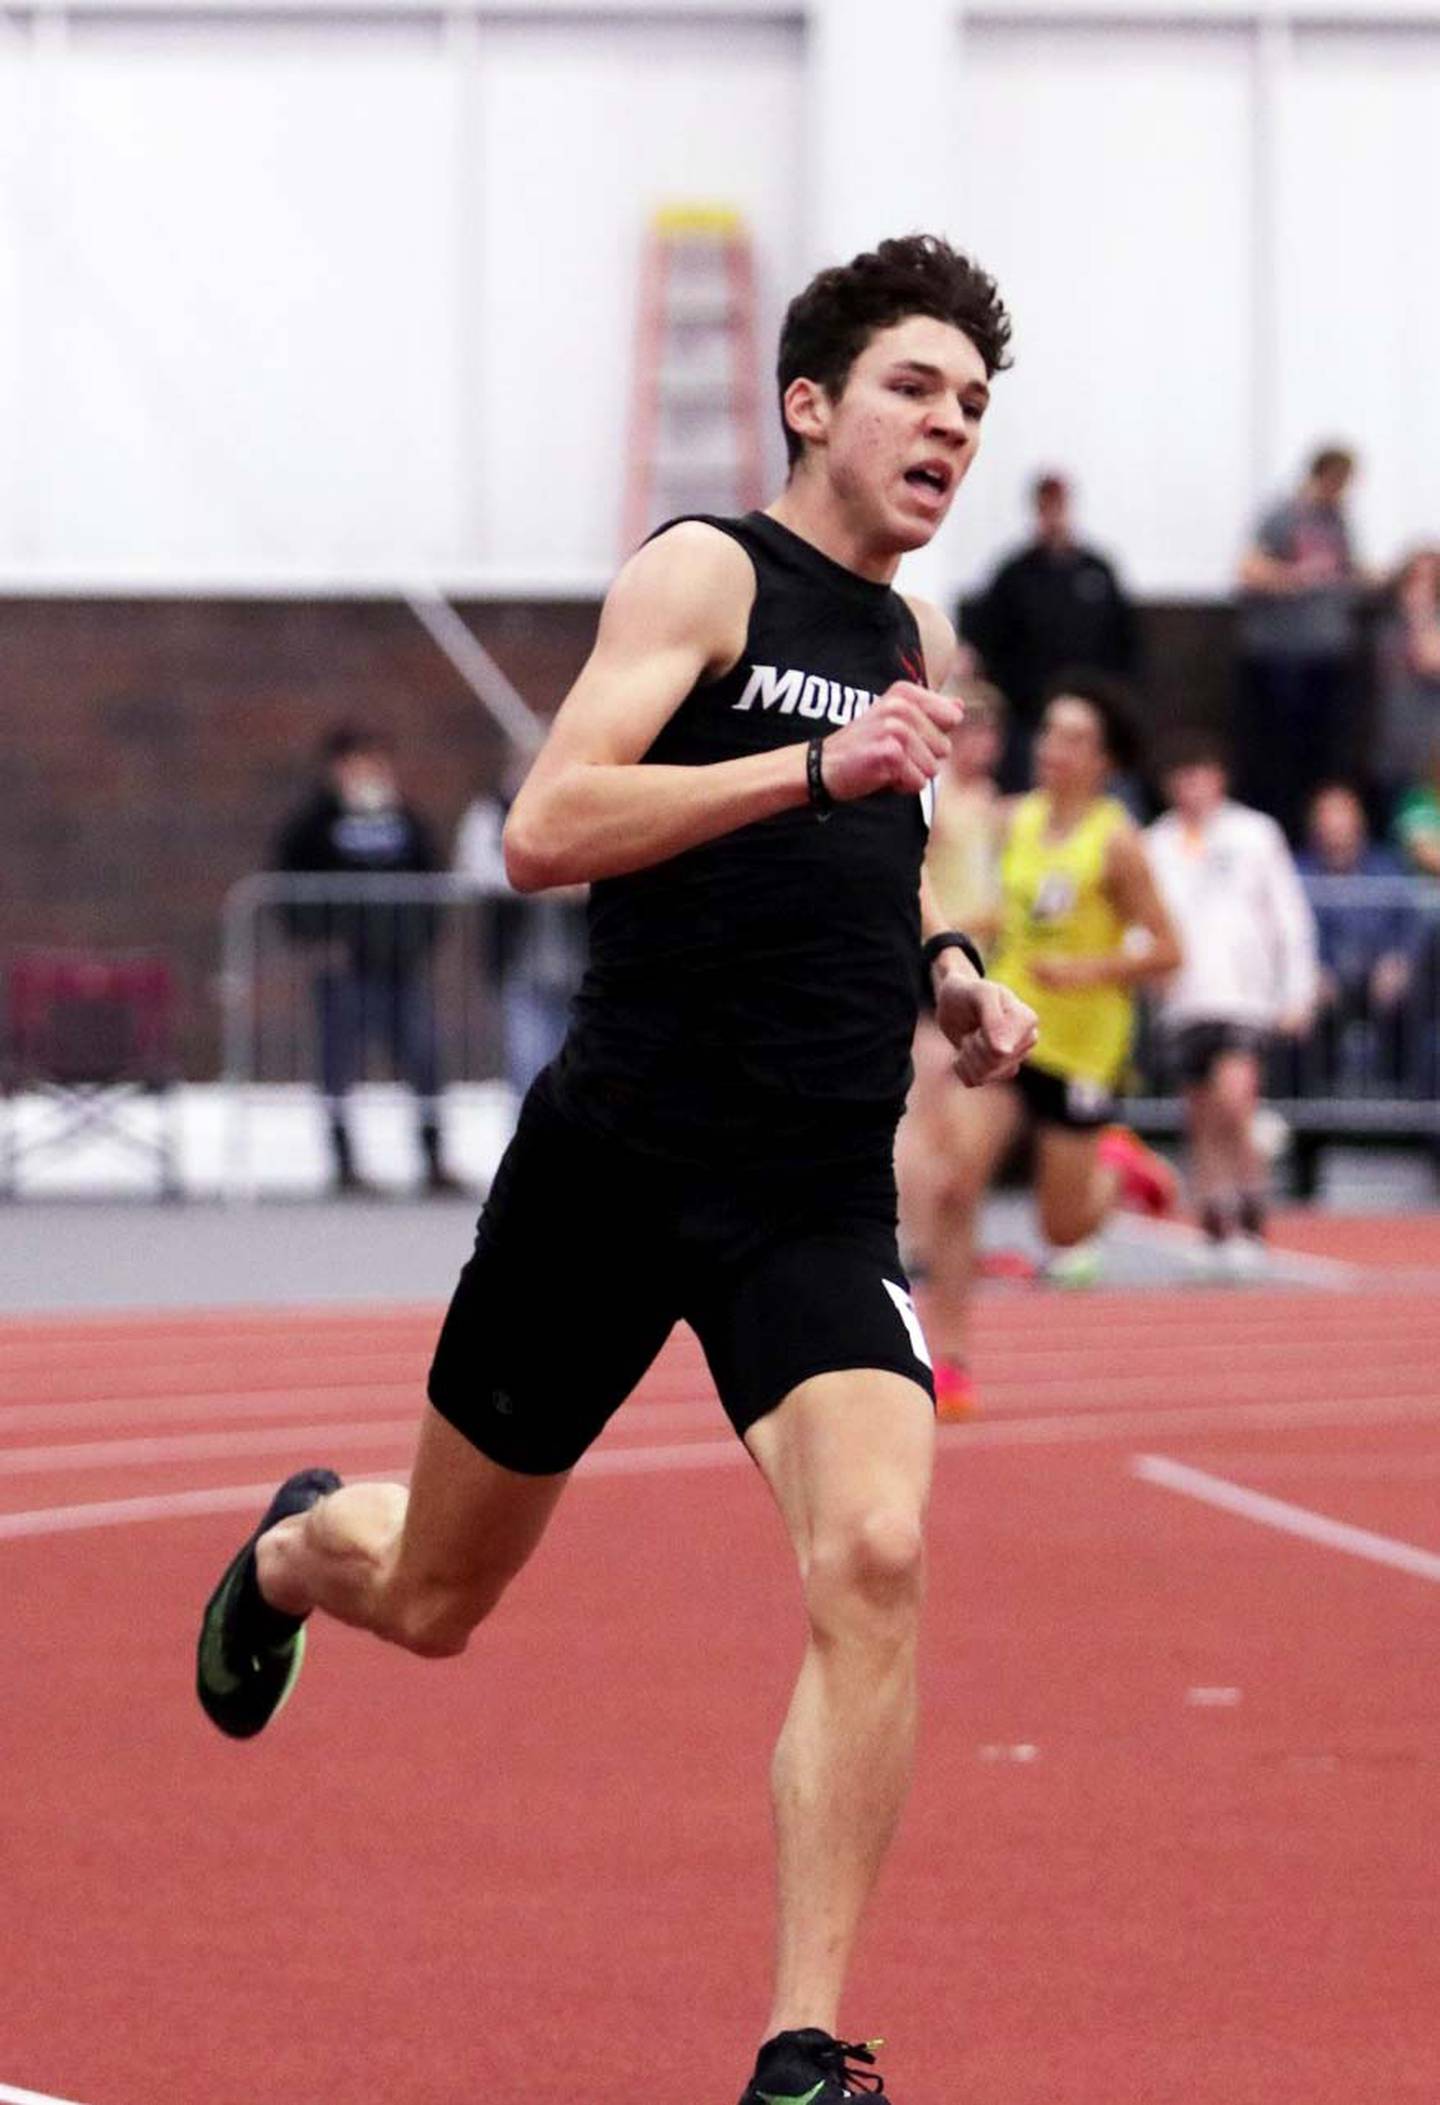 Ryce Reynolds, a Mount Ayr senior, races in the 800m dash Saturday where he set a new Raiders record with a time of 1:54.3, the 41st fastest time in the U.S. indoor high school season.